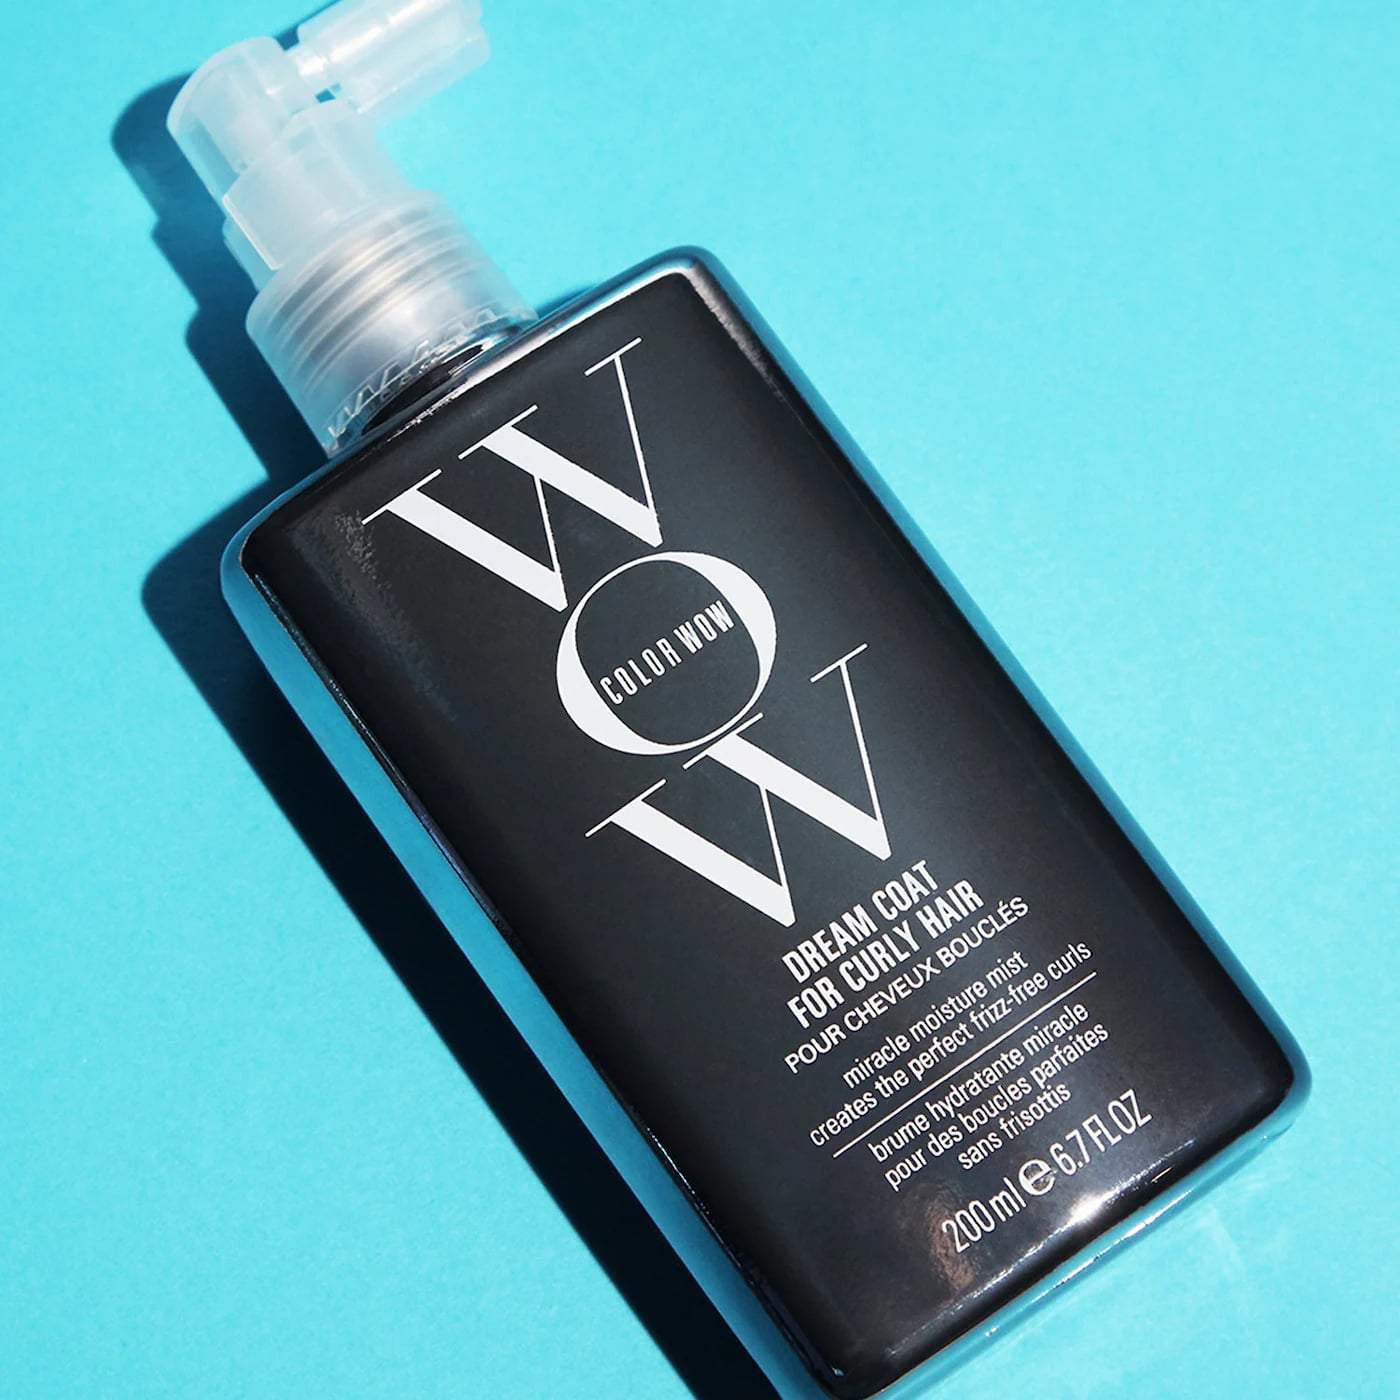 COLOR WOW Dream Coat Supernatural Spray - Keep Your Hair Frizz-Free and  Shiny No Matter the Weather with Award-Winning Anti-Frizz Spray